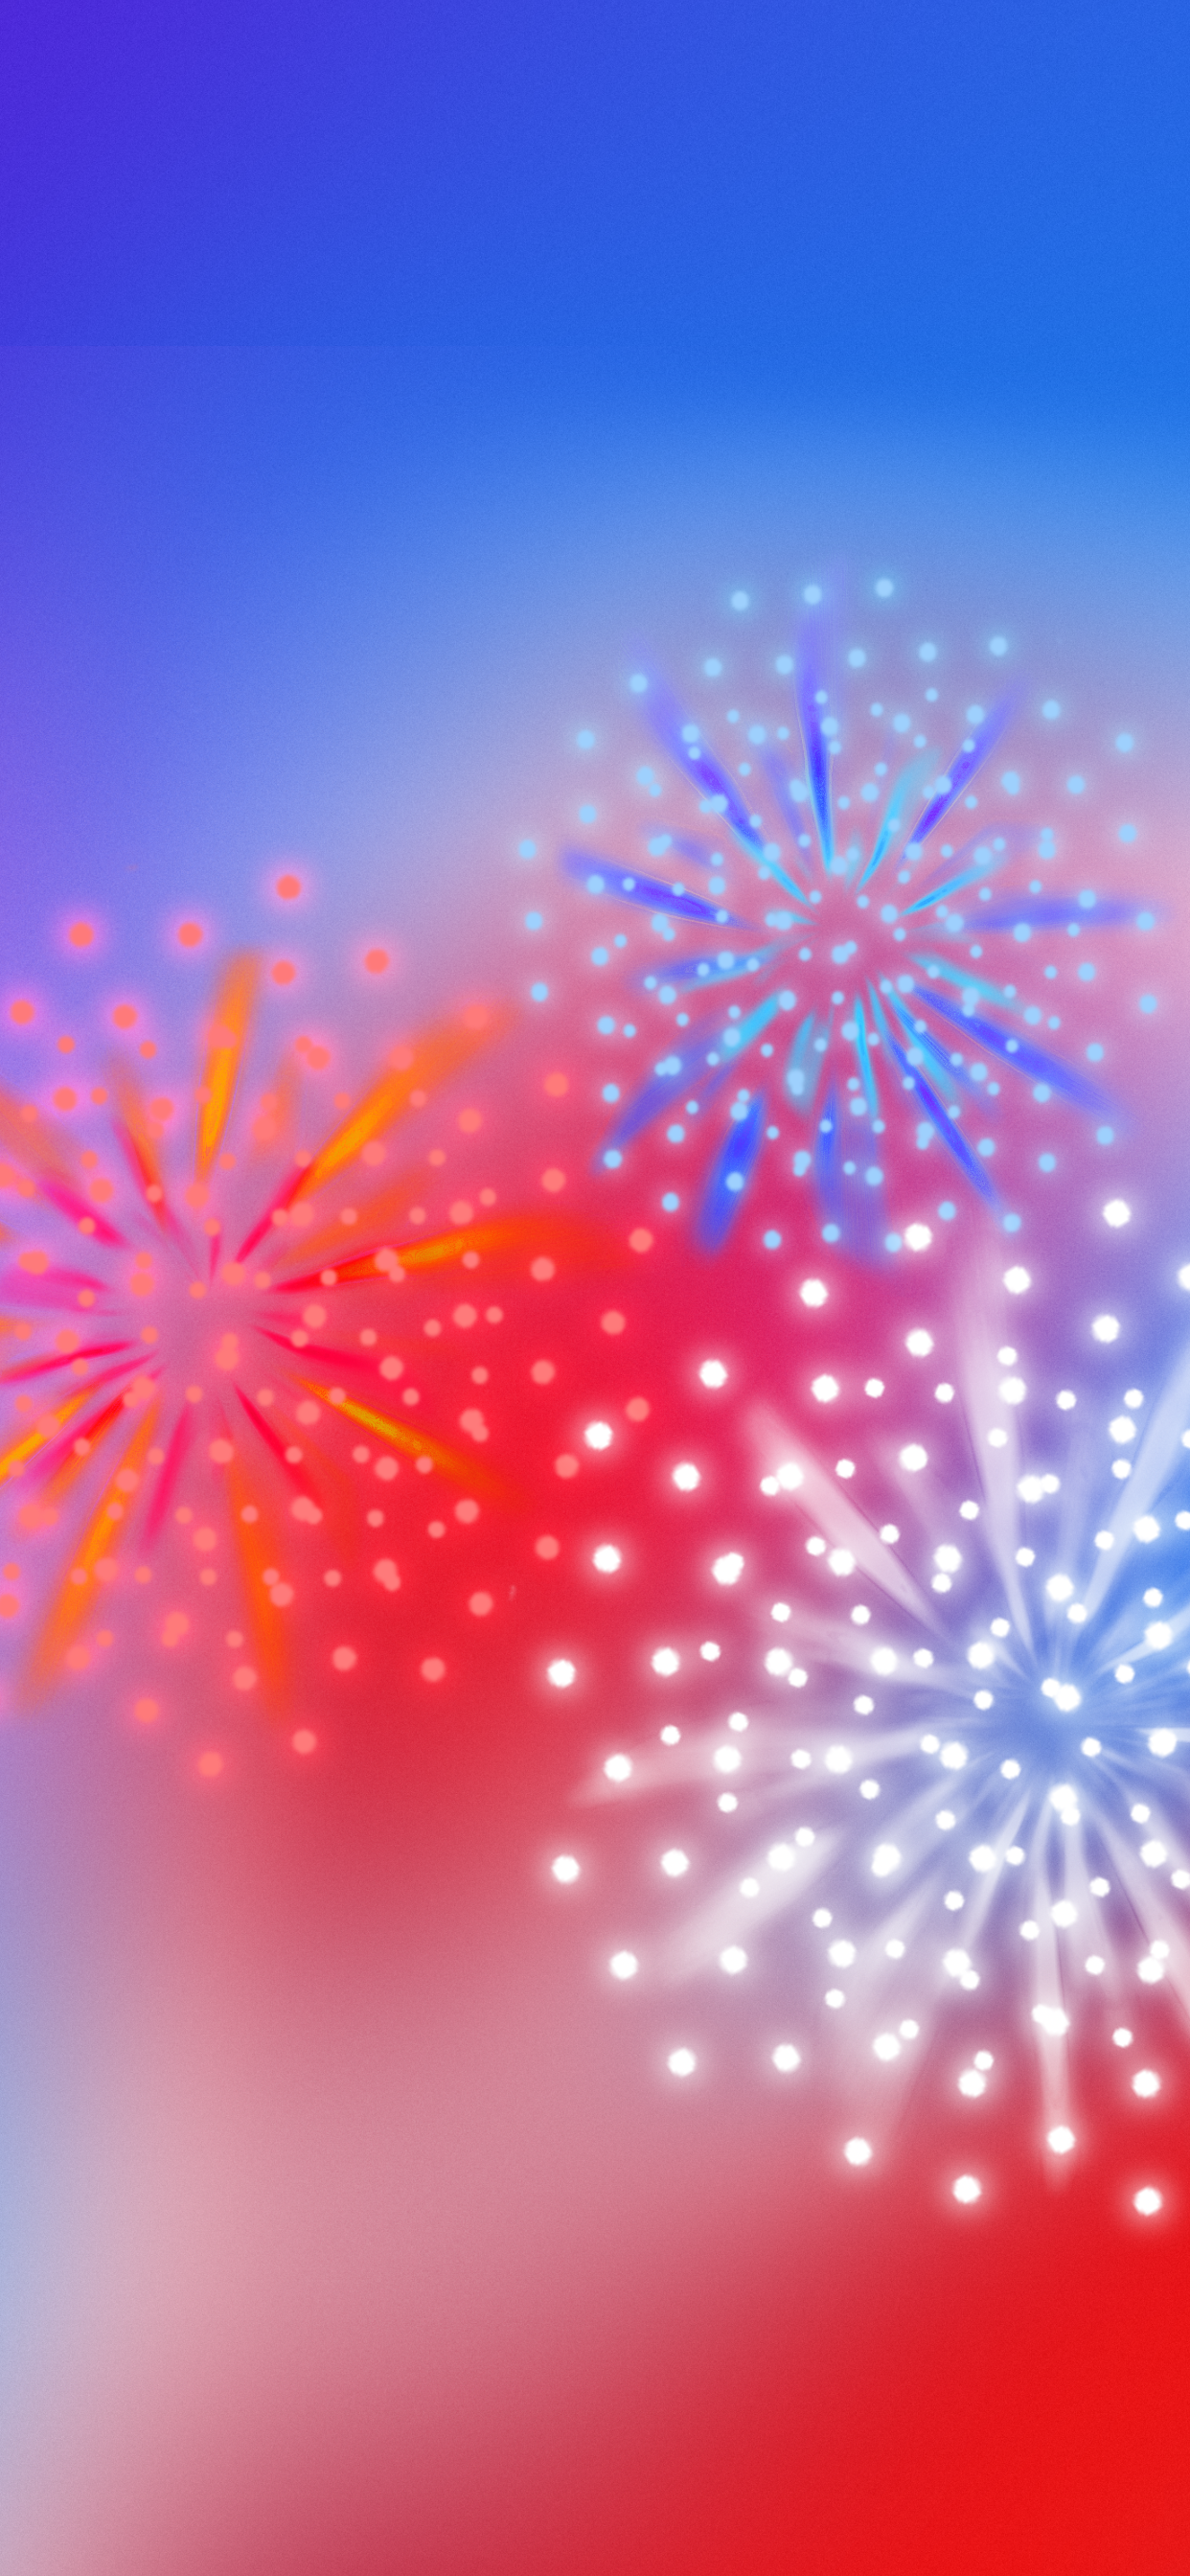 Independence Day fireworks wallpapers for iPhone